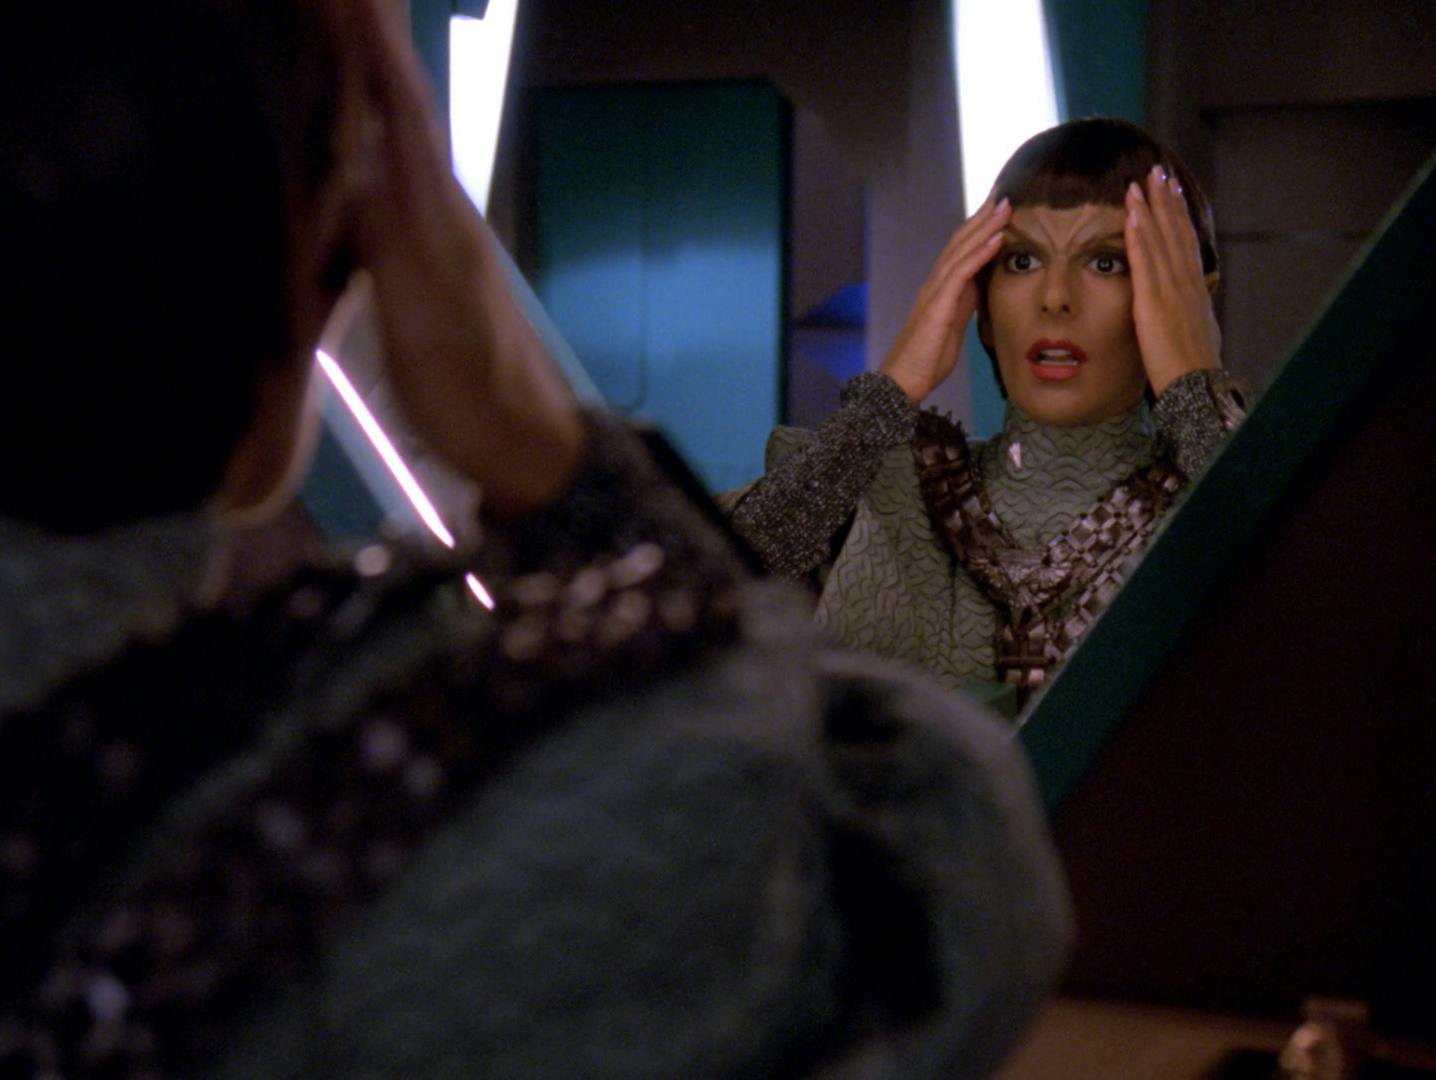 Deanna Troi expresses shock and horror as she raises her hands to her face upon discovering she has been altered to appear as a Romulan in 'Face of the Enemy'